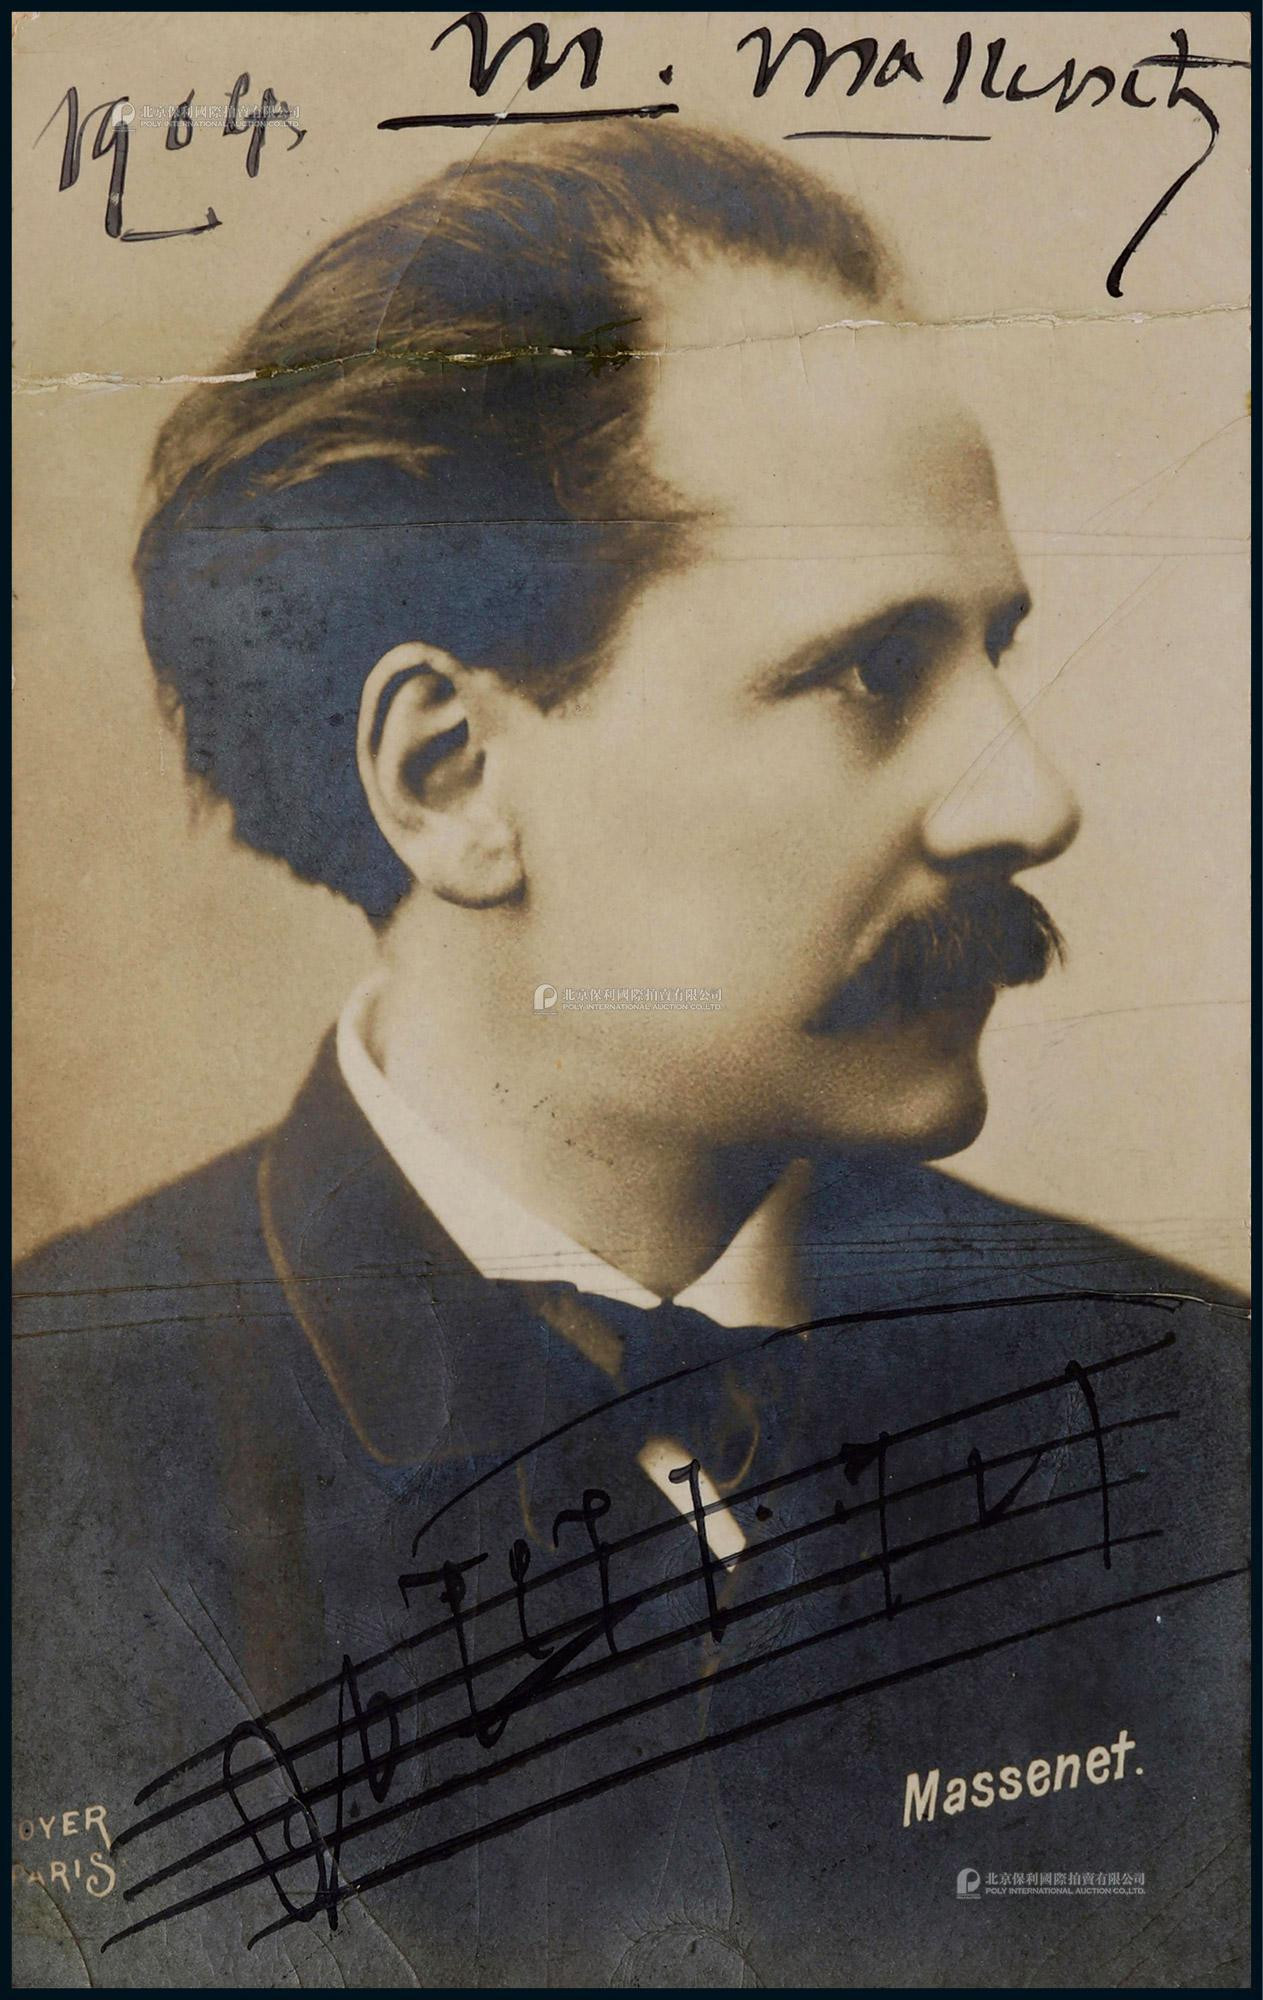 The autographed photo of the music score of “Werther” by Jules Massenet, a famous French composer, with certificate